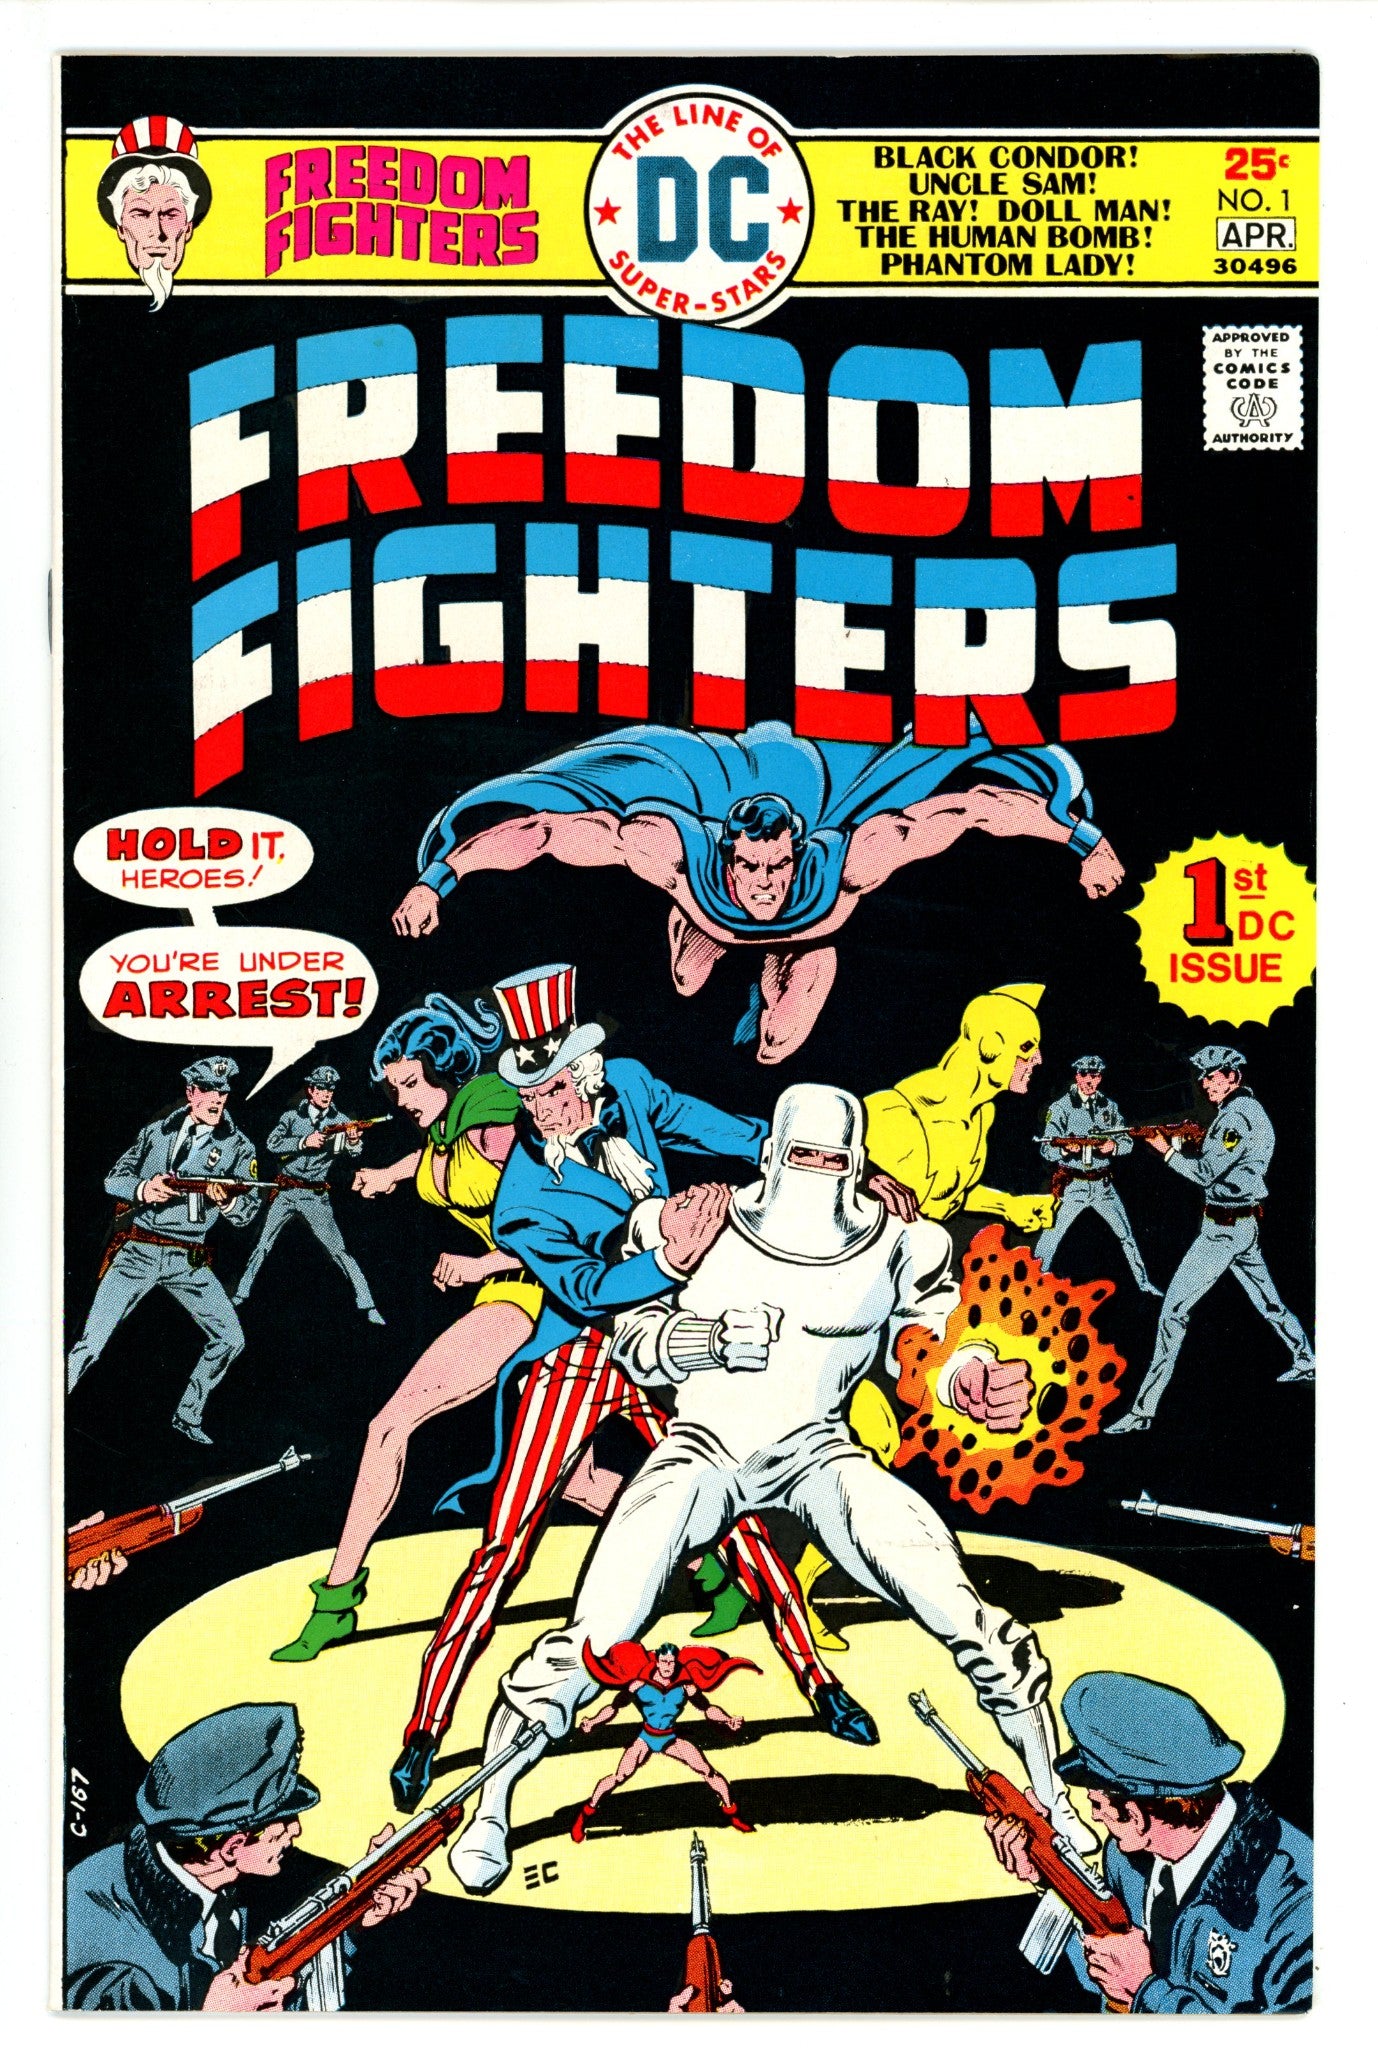 Freedom Fighters Vol 1 1 VF+ (8.5) (1976) 